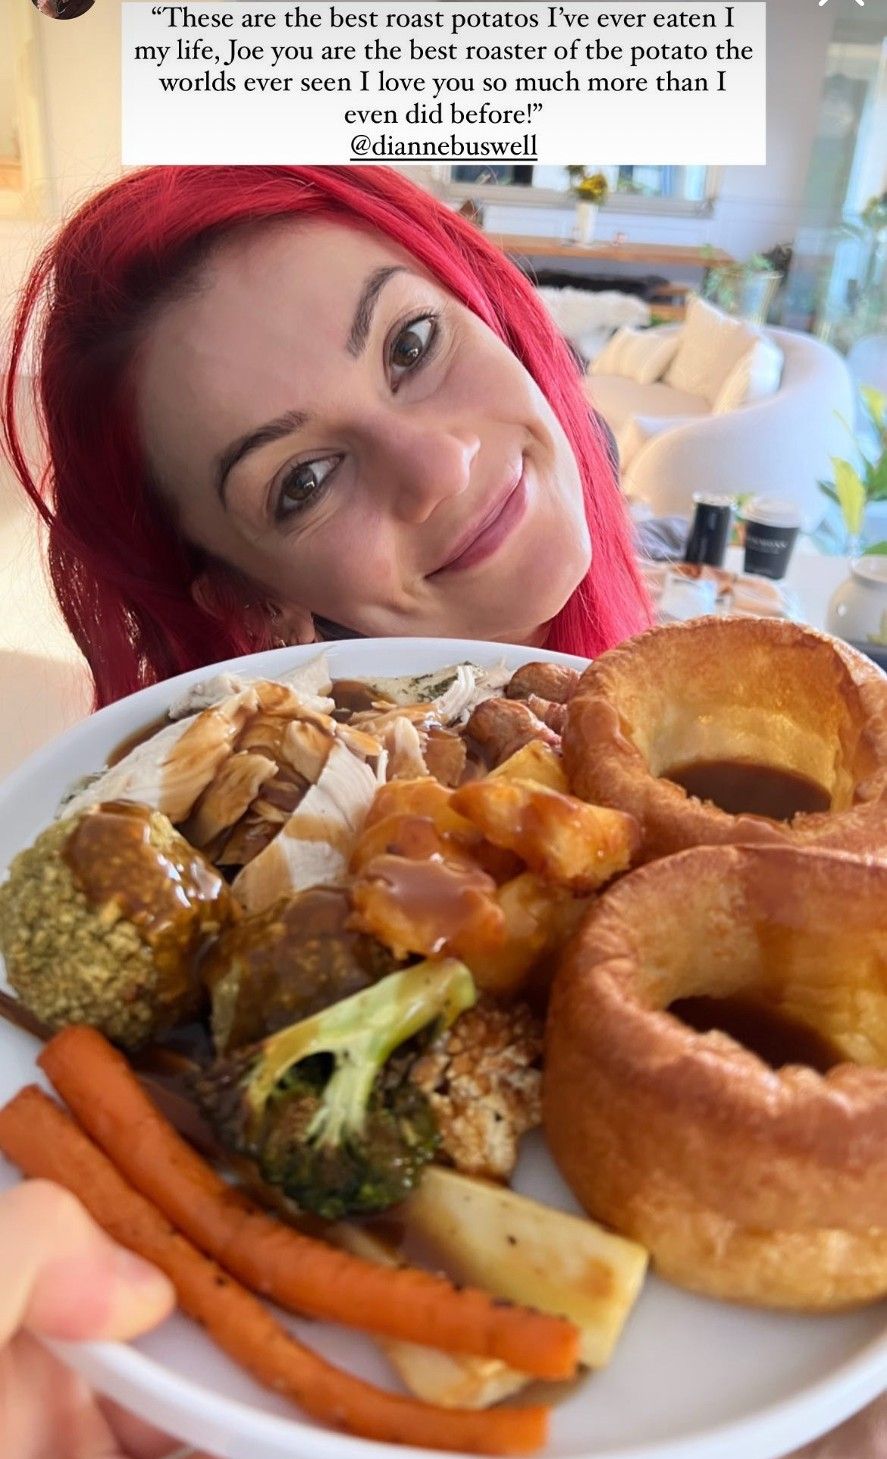 Dianne Buswell smiling with a roast dinner